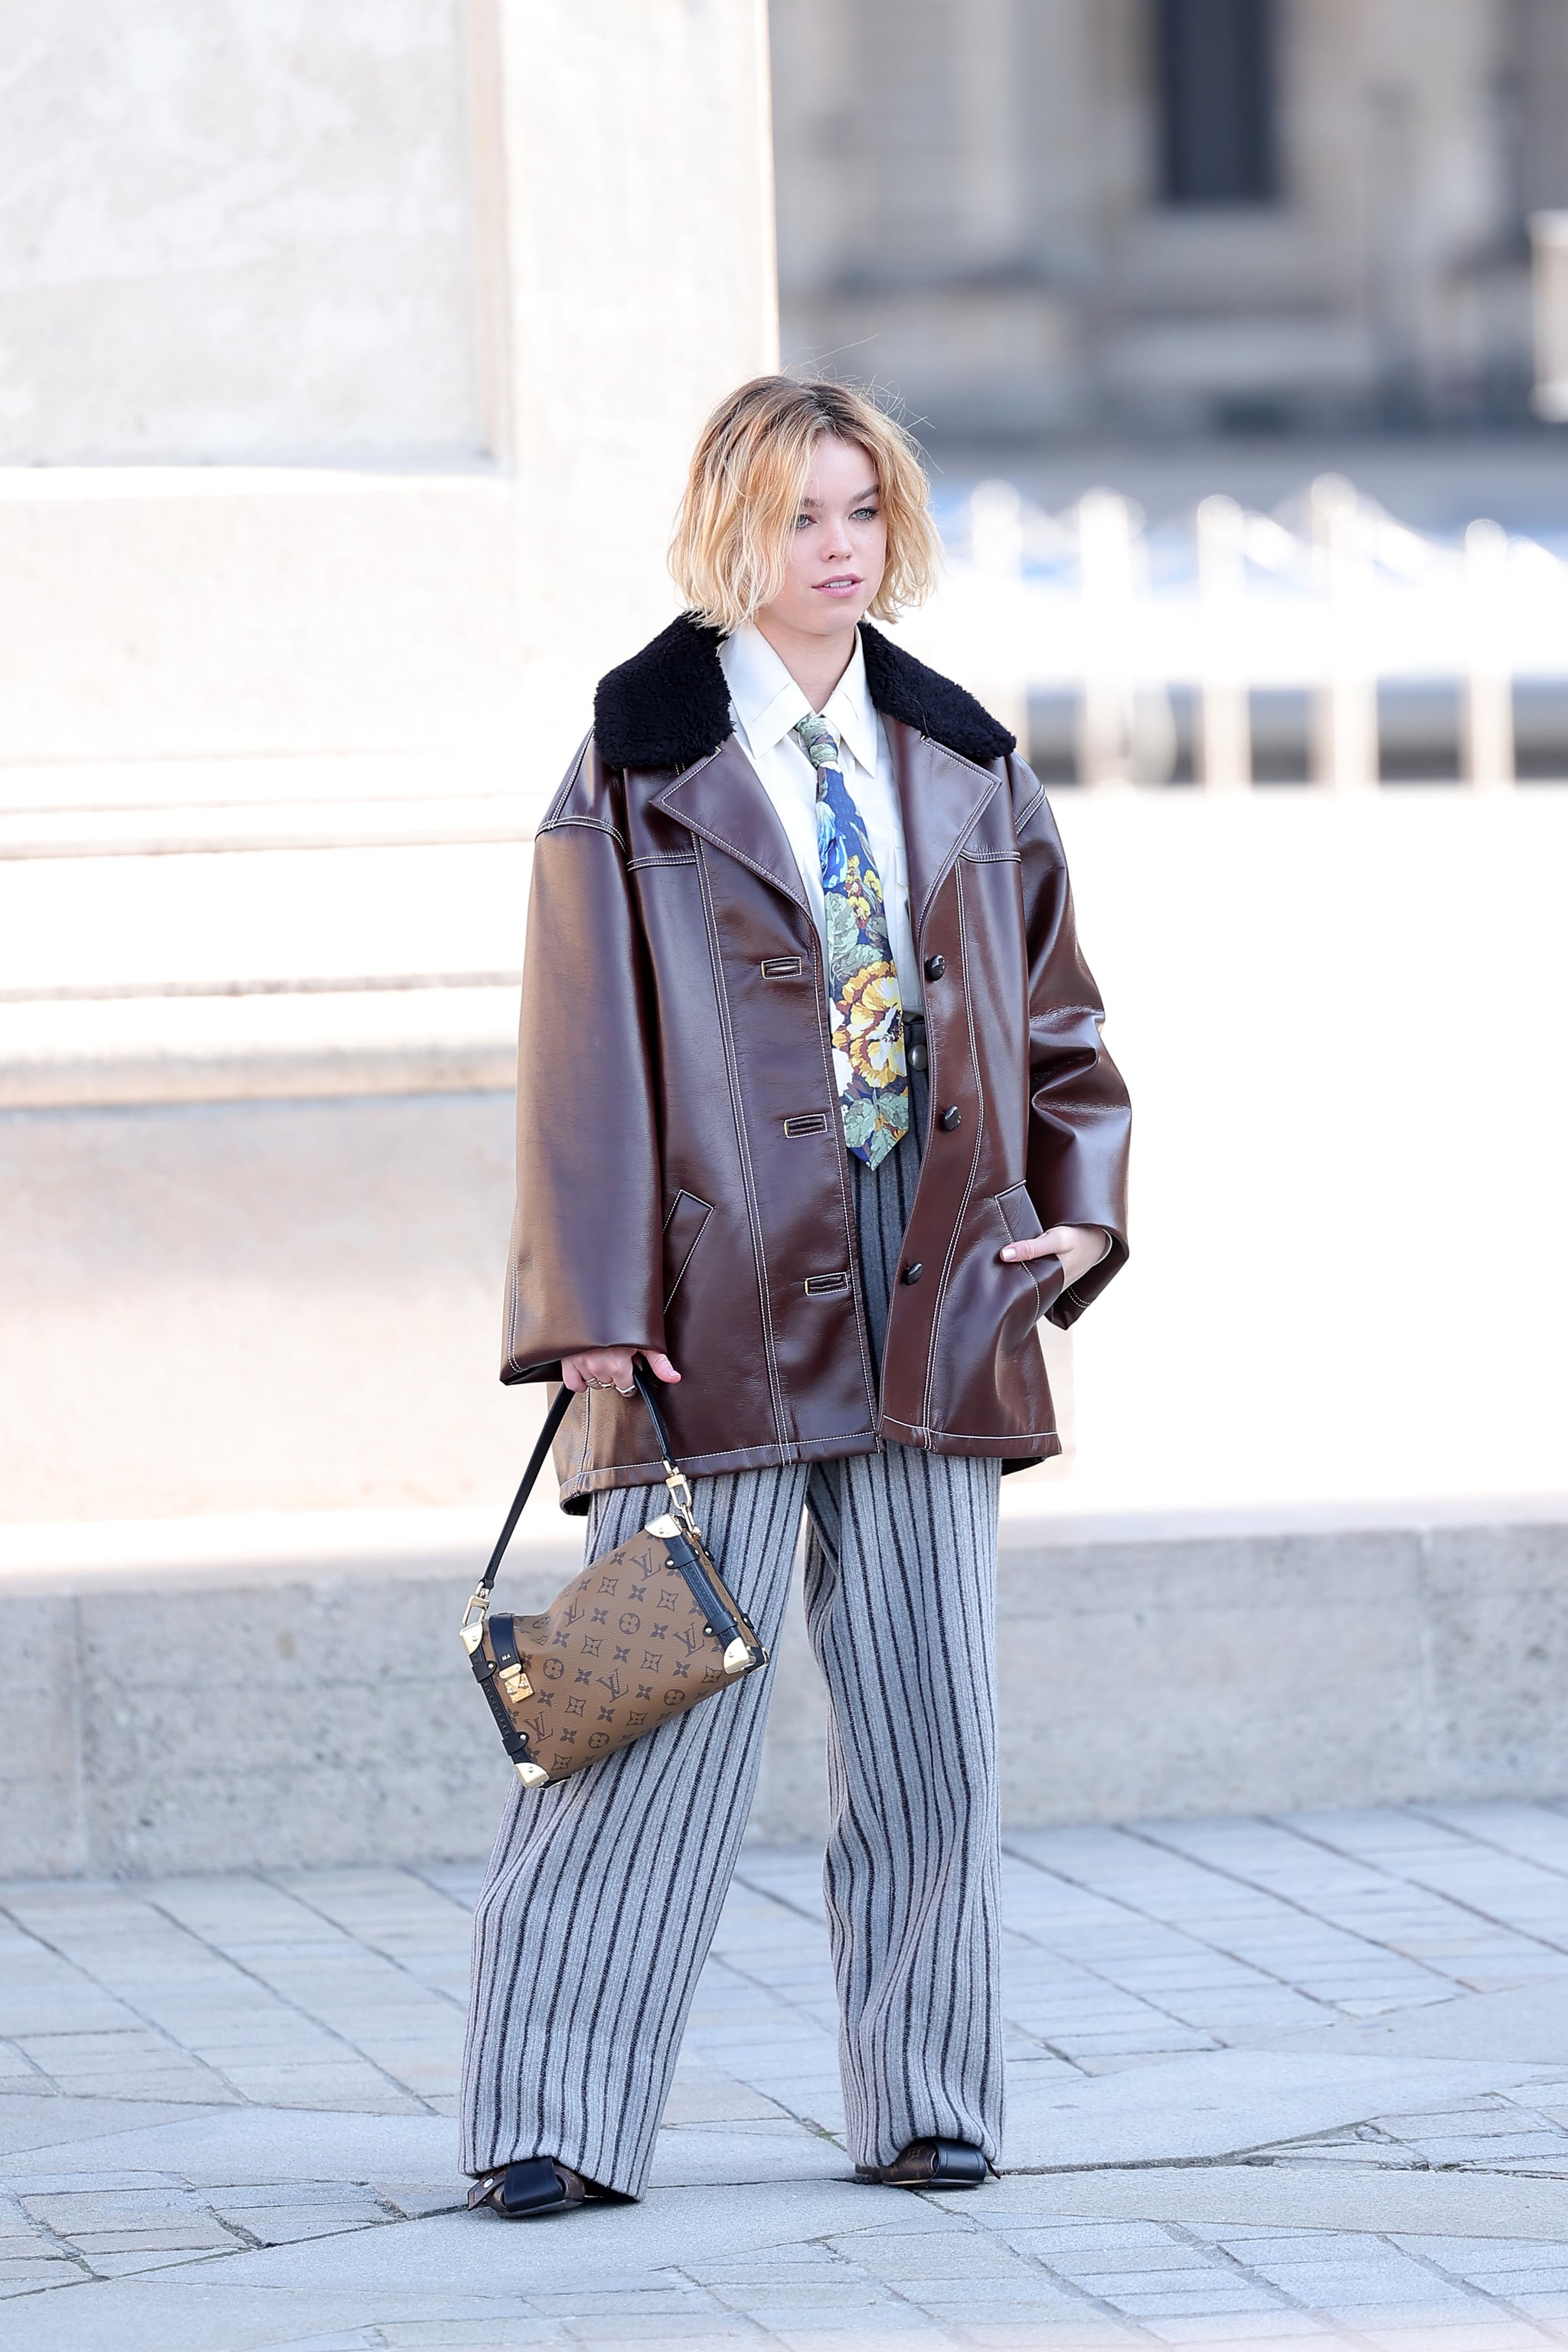 Milly Alcock Masters the 'Cool Dad' Look at the Louis Vuitton Show